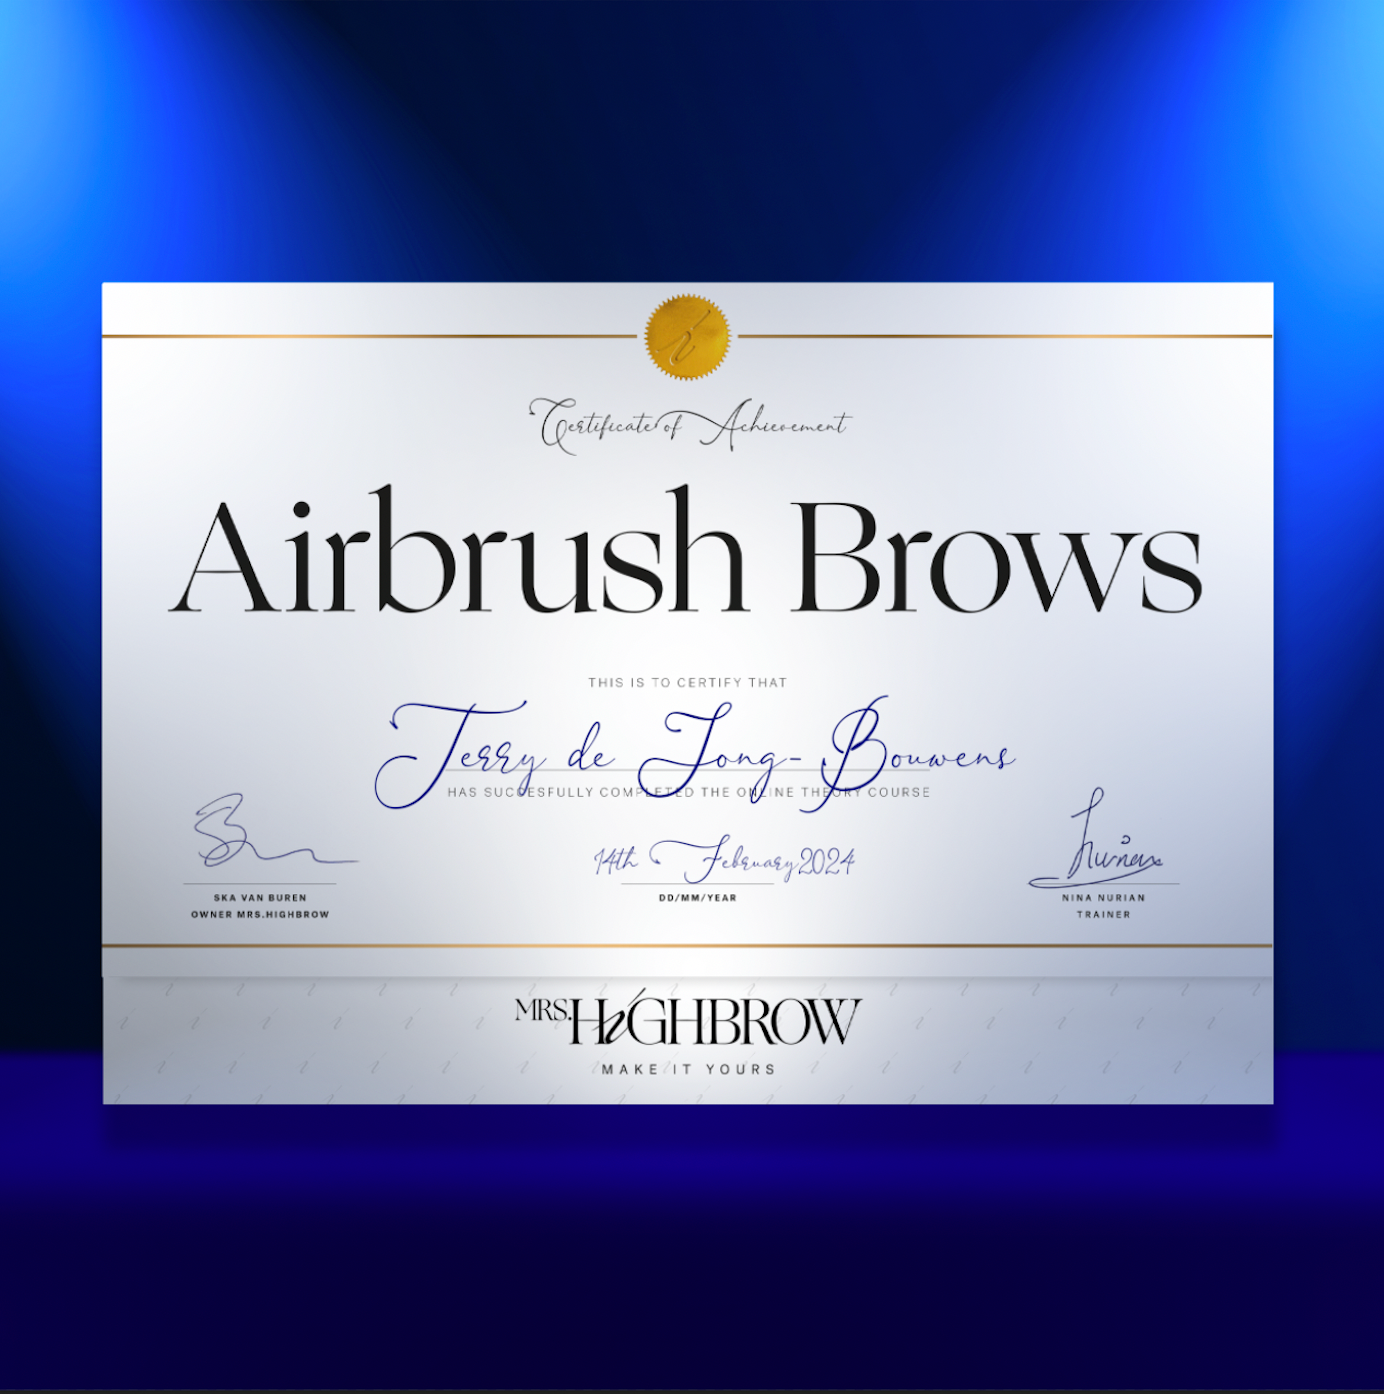 Online Cursus Airbrush Brows - Mrs.Highbrow Professional